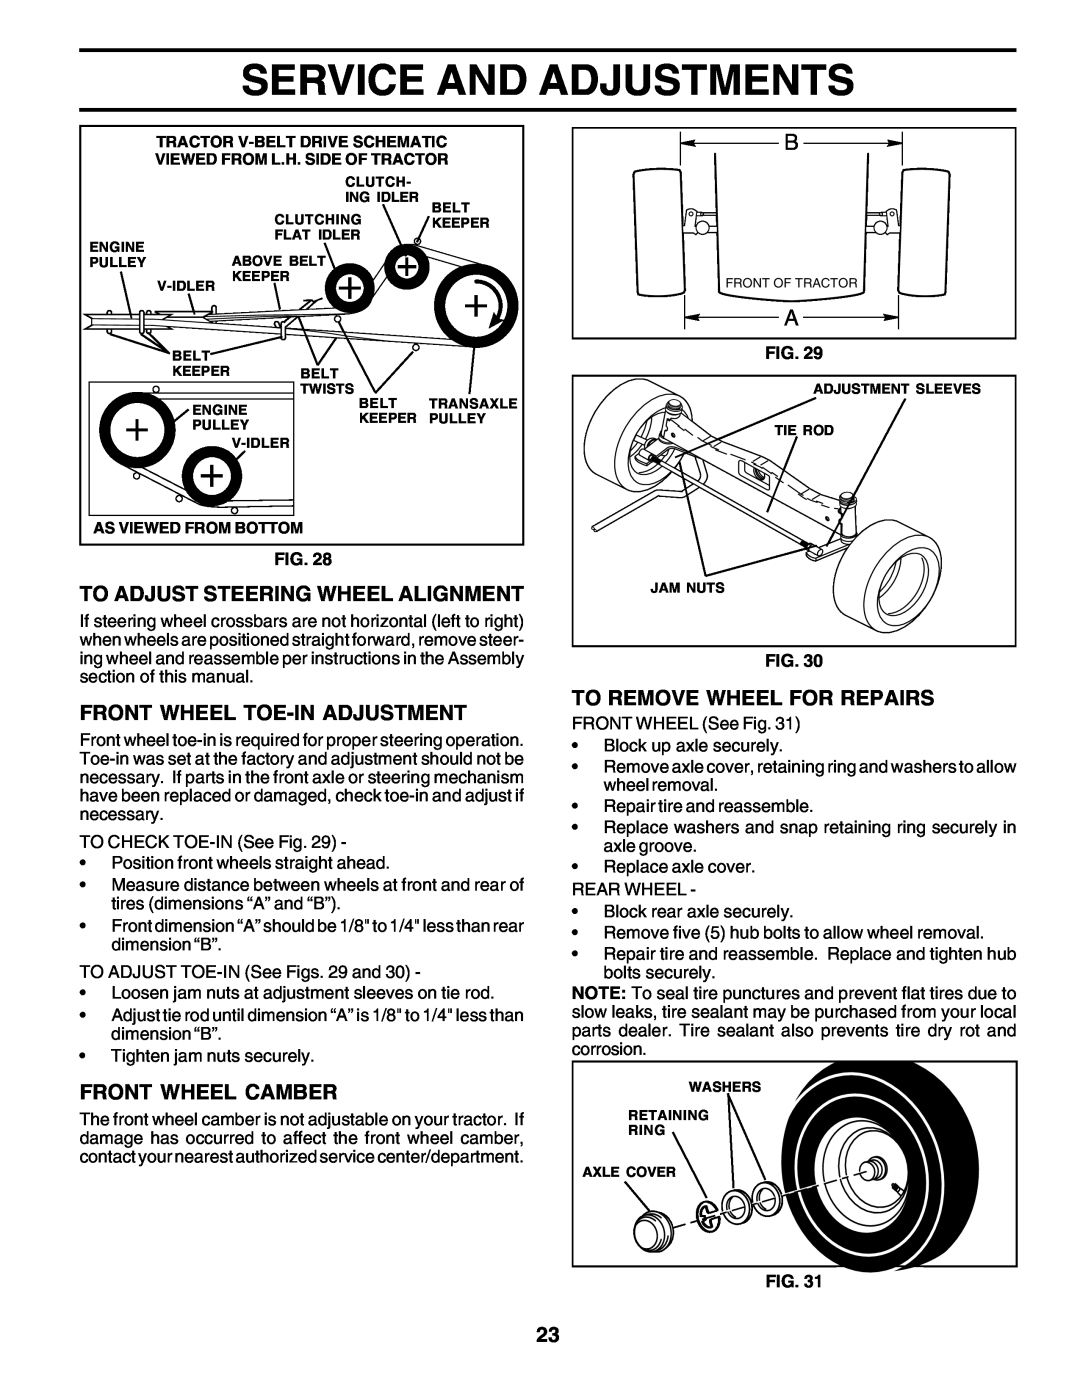 Poulan 177271 owner manual Service And Adjustments, To Adjust Steering Wheel Alignment, Front Wheel Toe-In Adjustment 